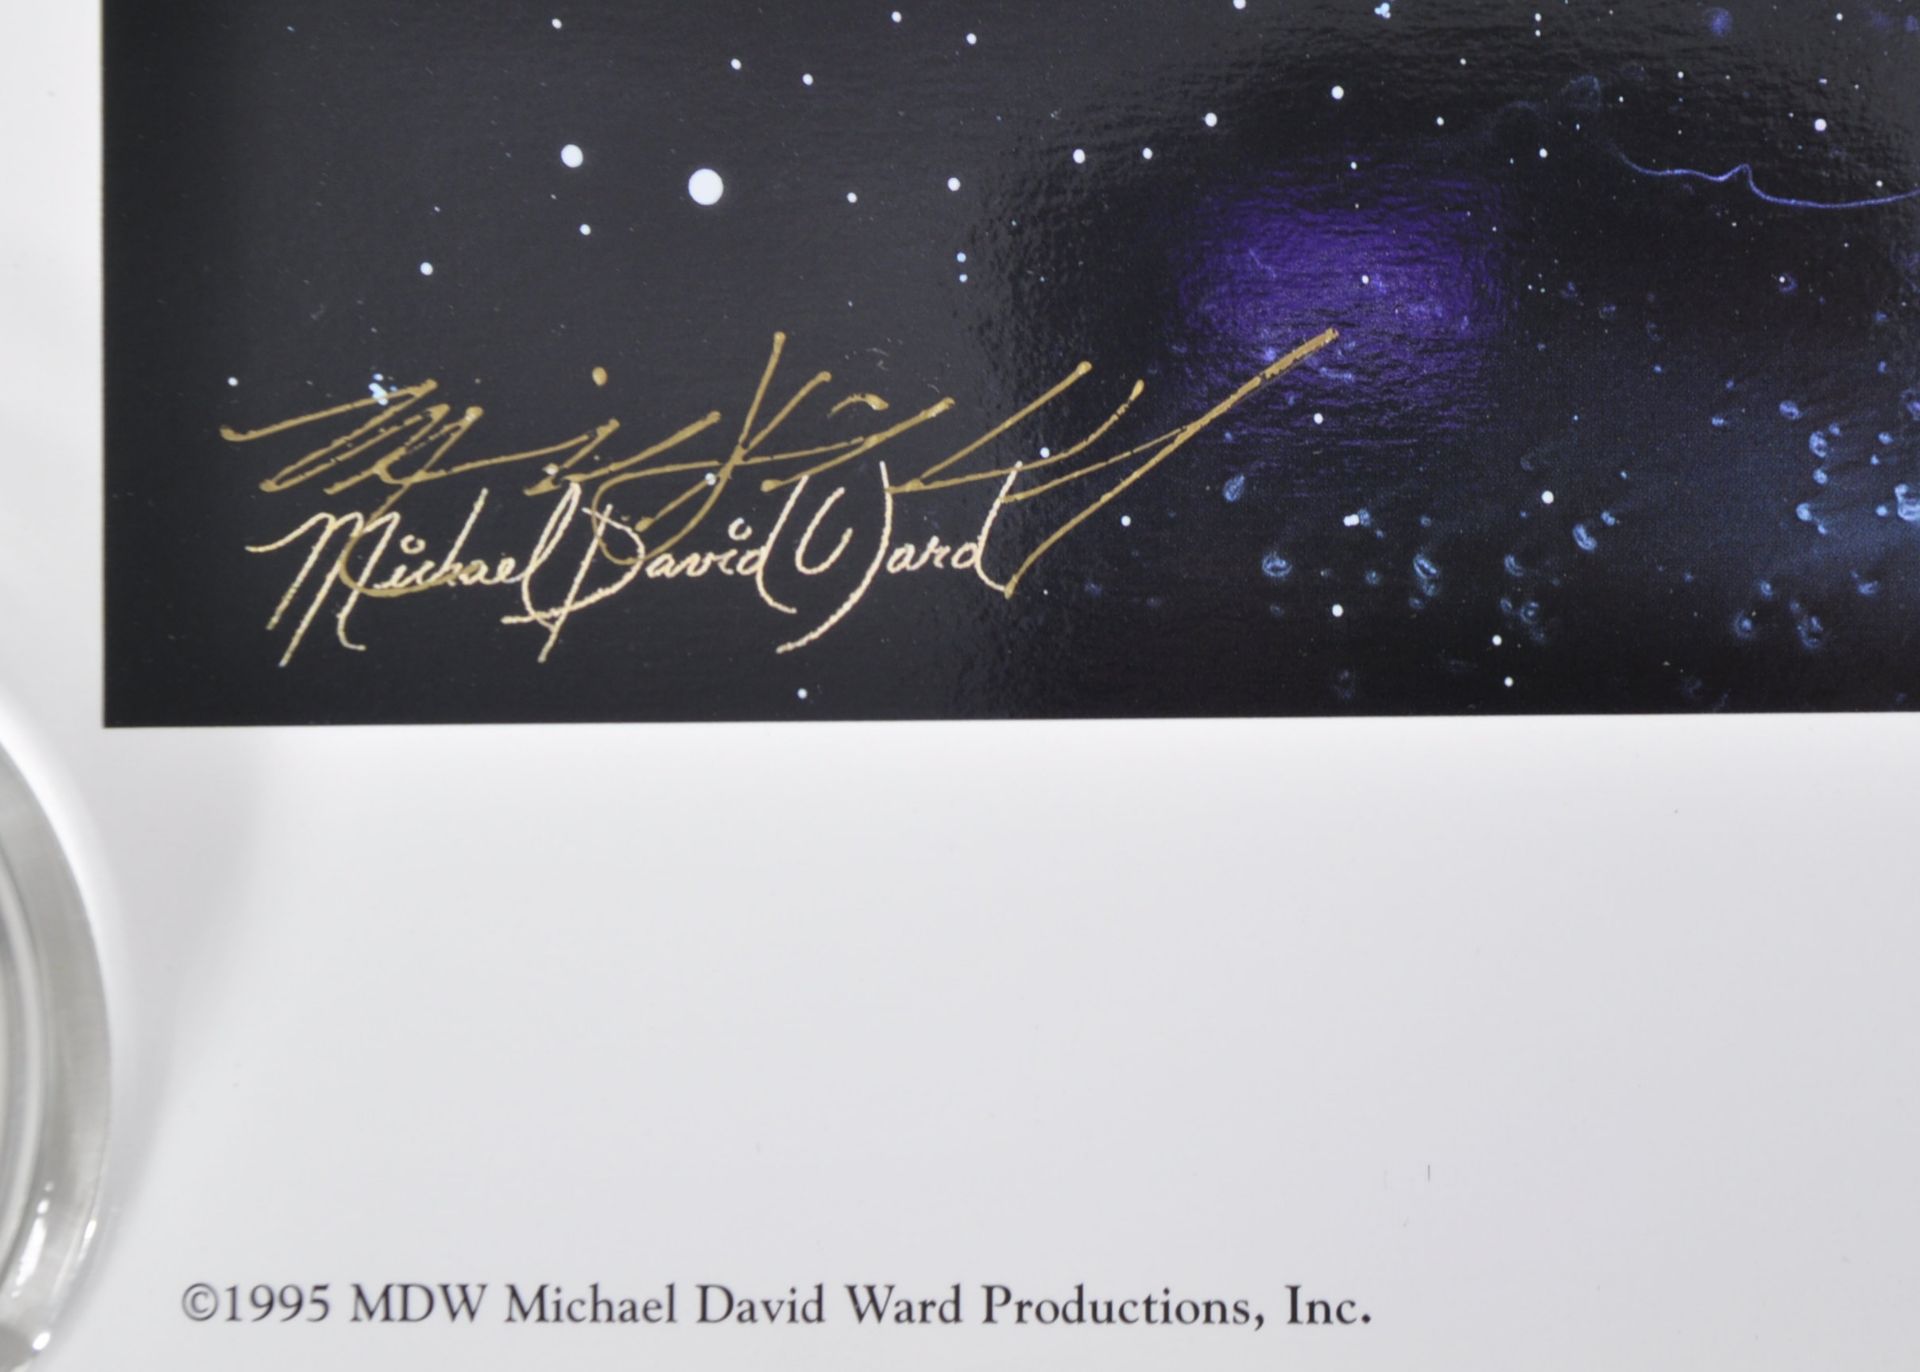 ESTATE OF DAVE PROWSE - MICHAEL DAVID WARD - EARTH SHROUD PRINT - Image 2 of 4